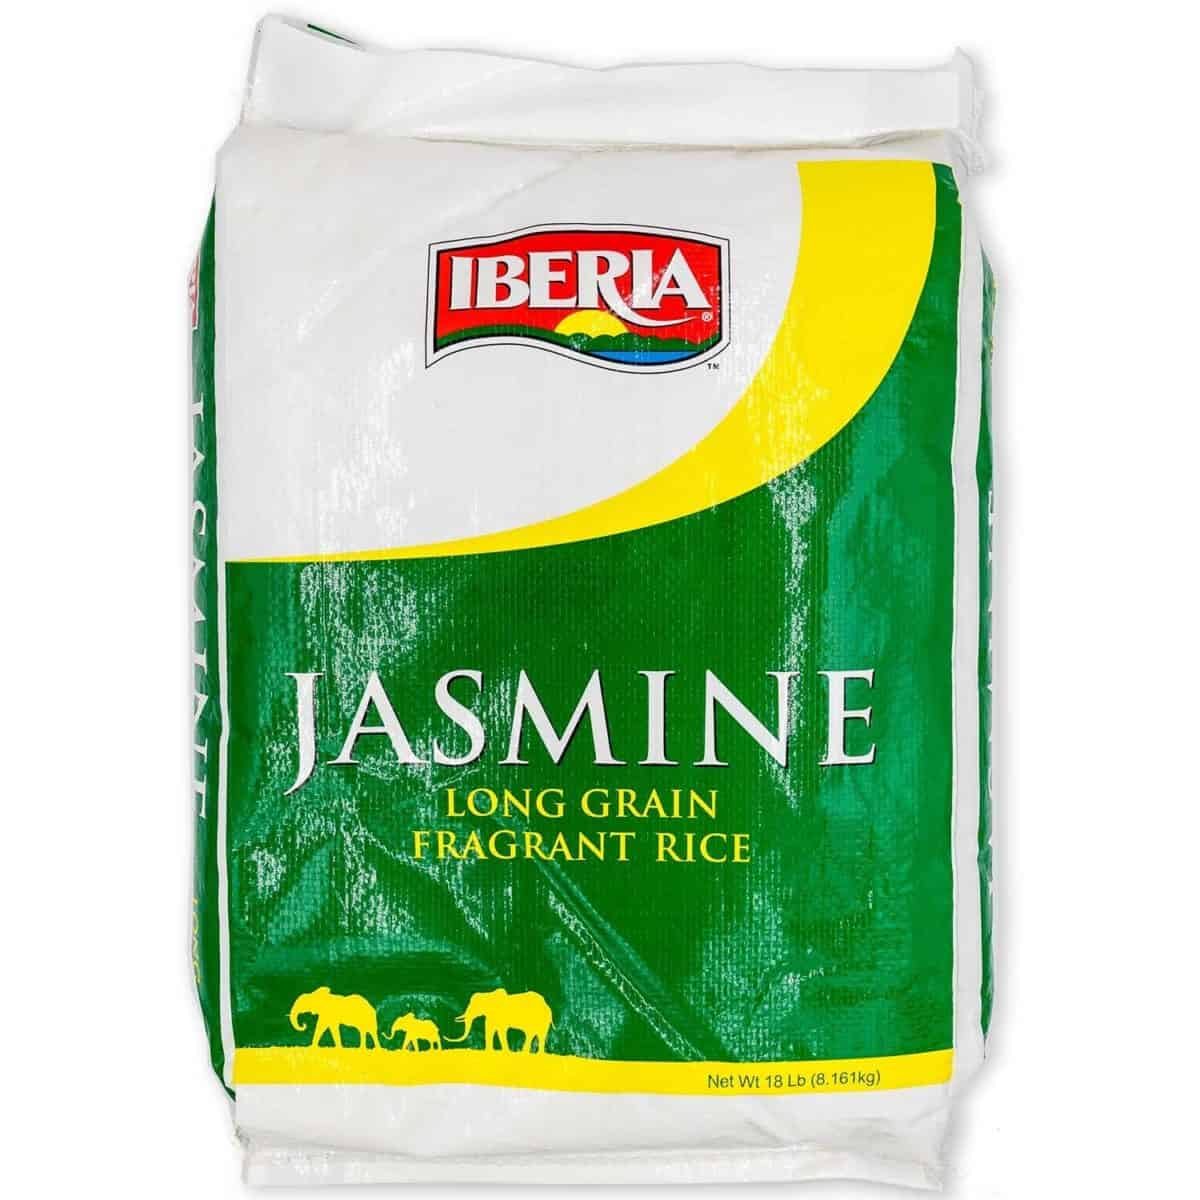 Jasmine rice as a substitute for basmati rice